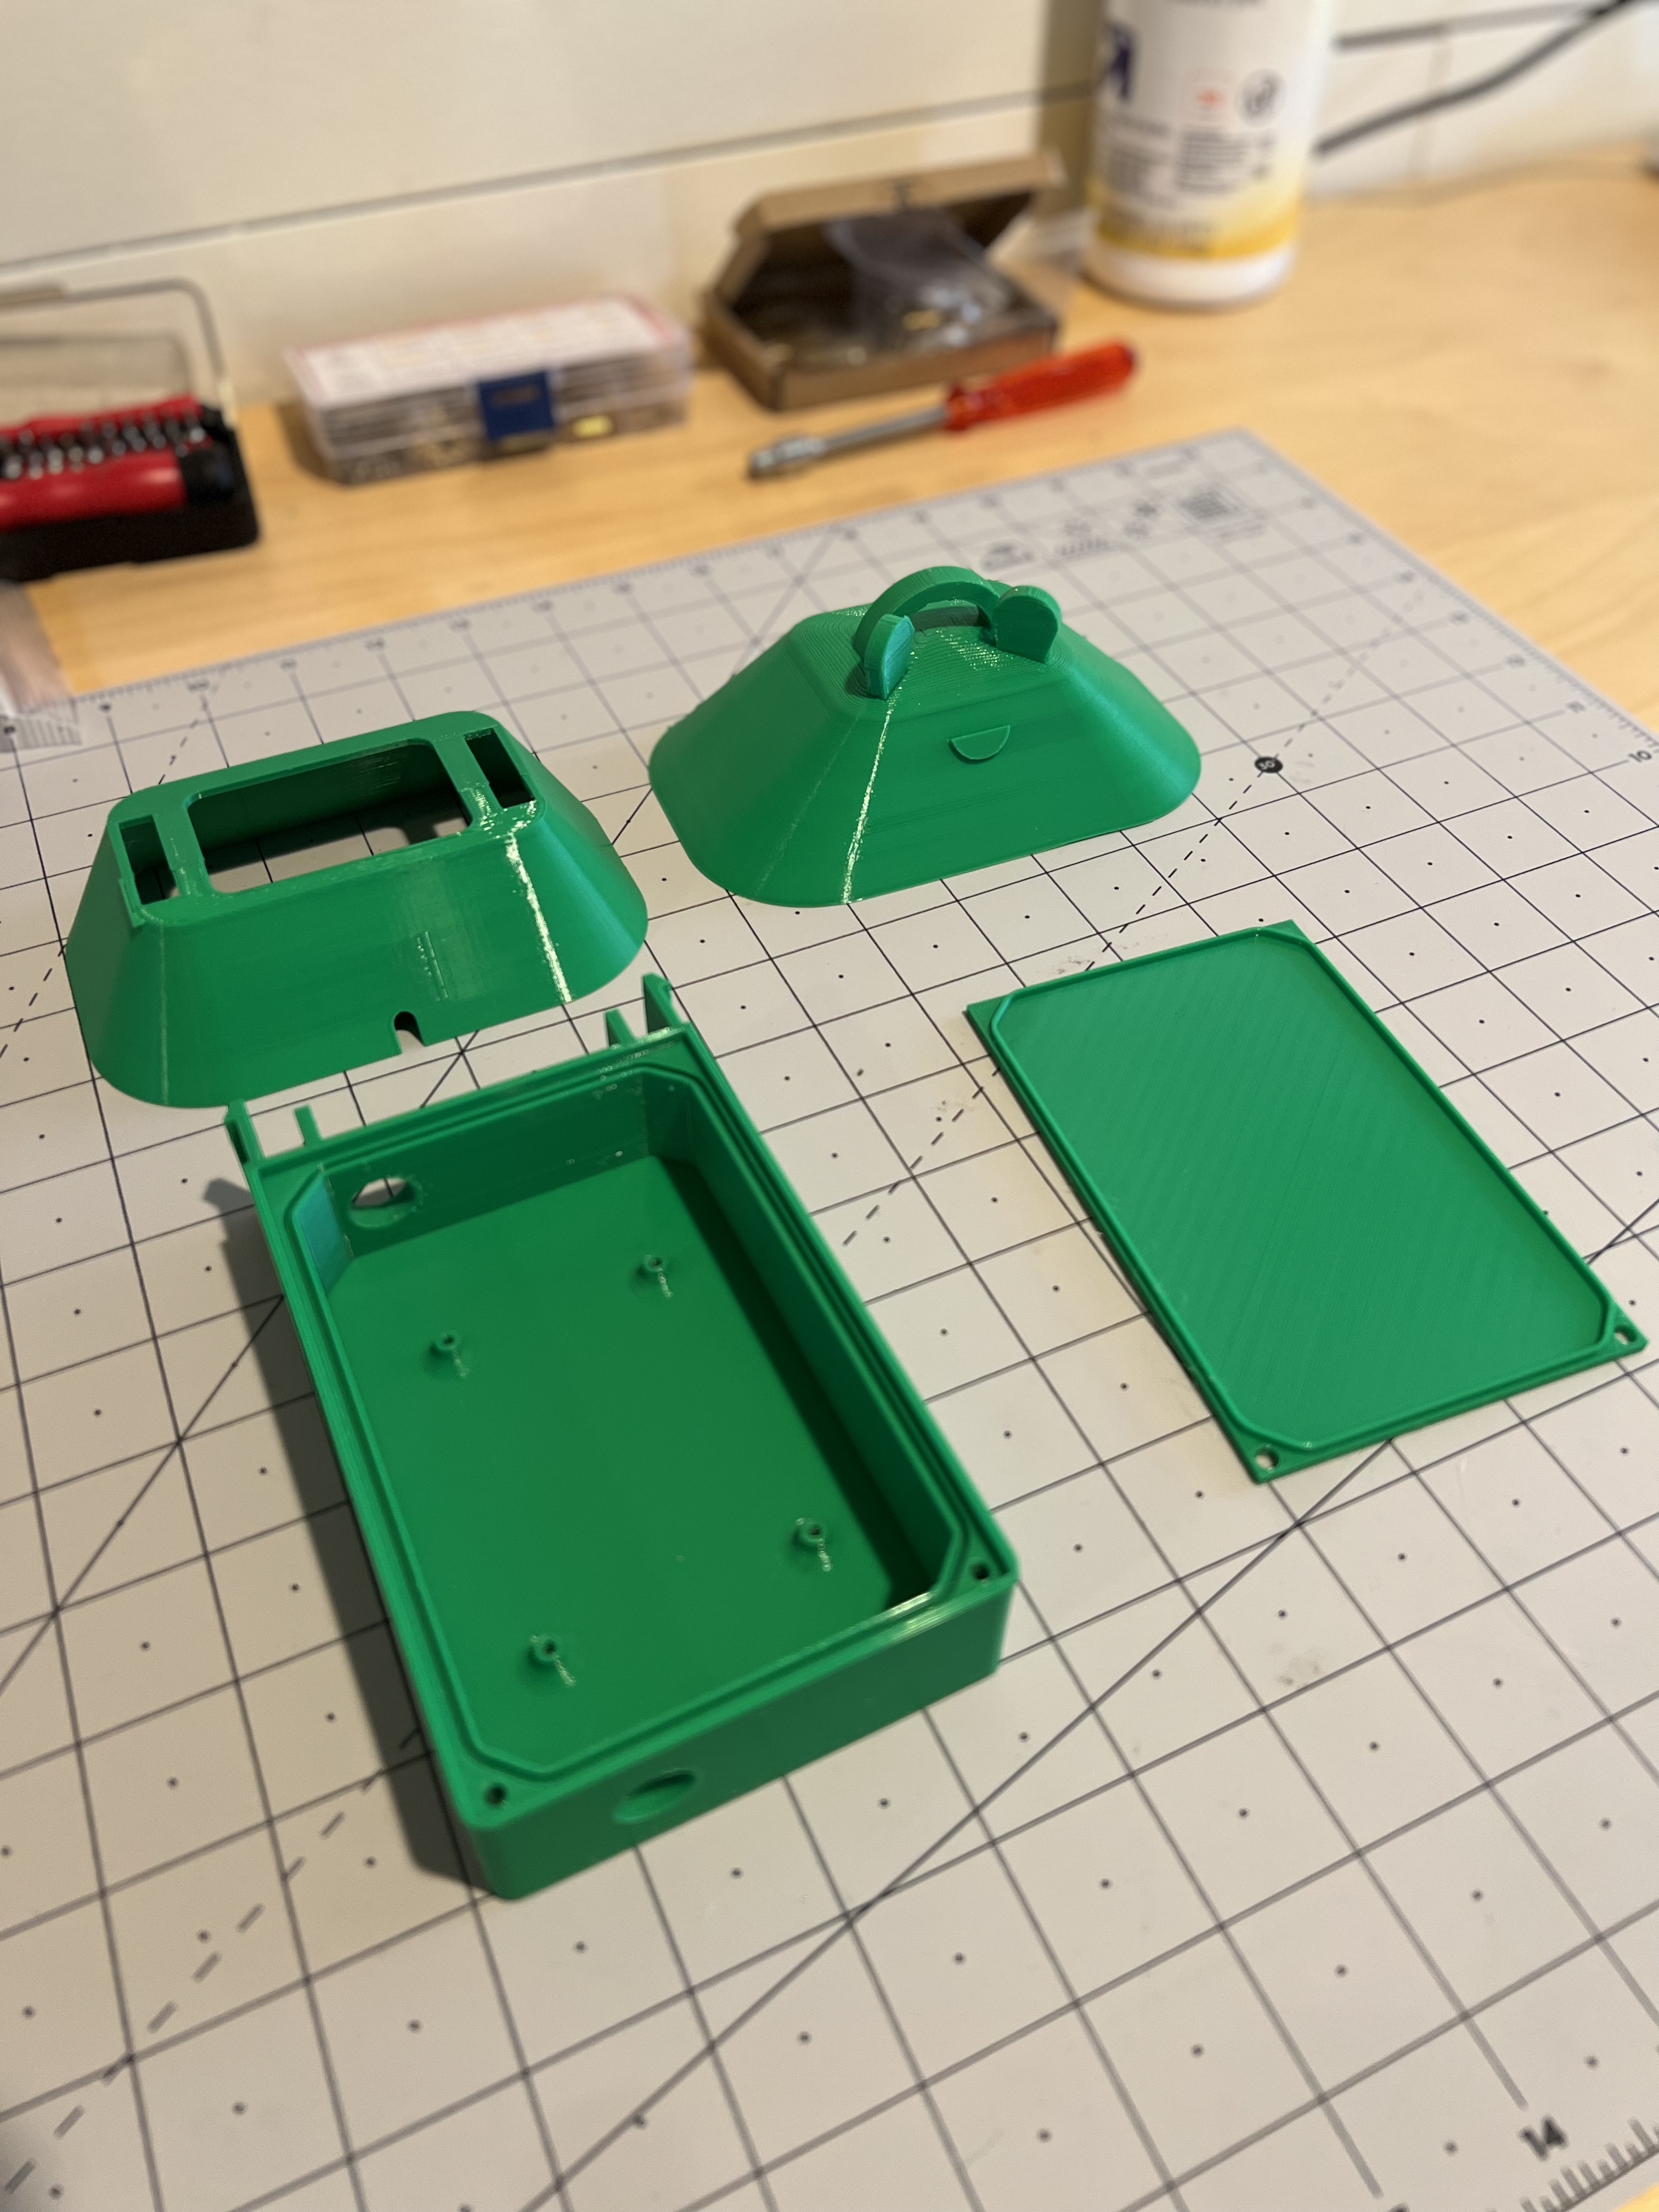 The 3D printed parts you need to build a ribbit network sensor